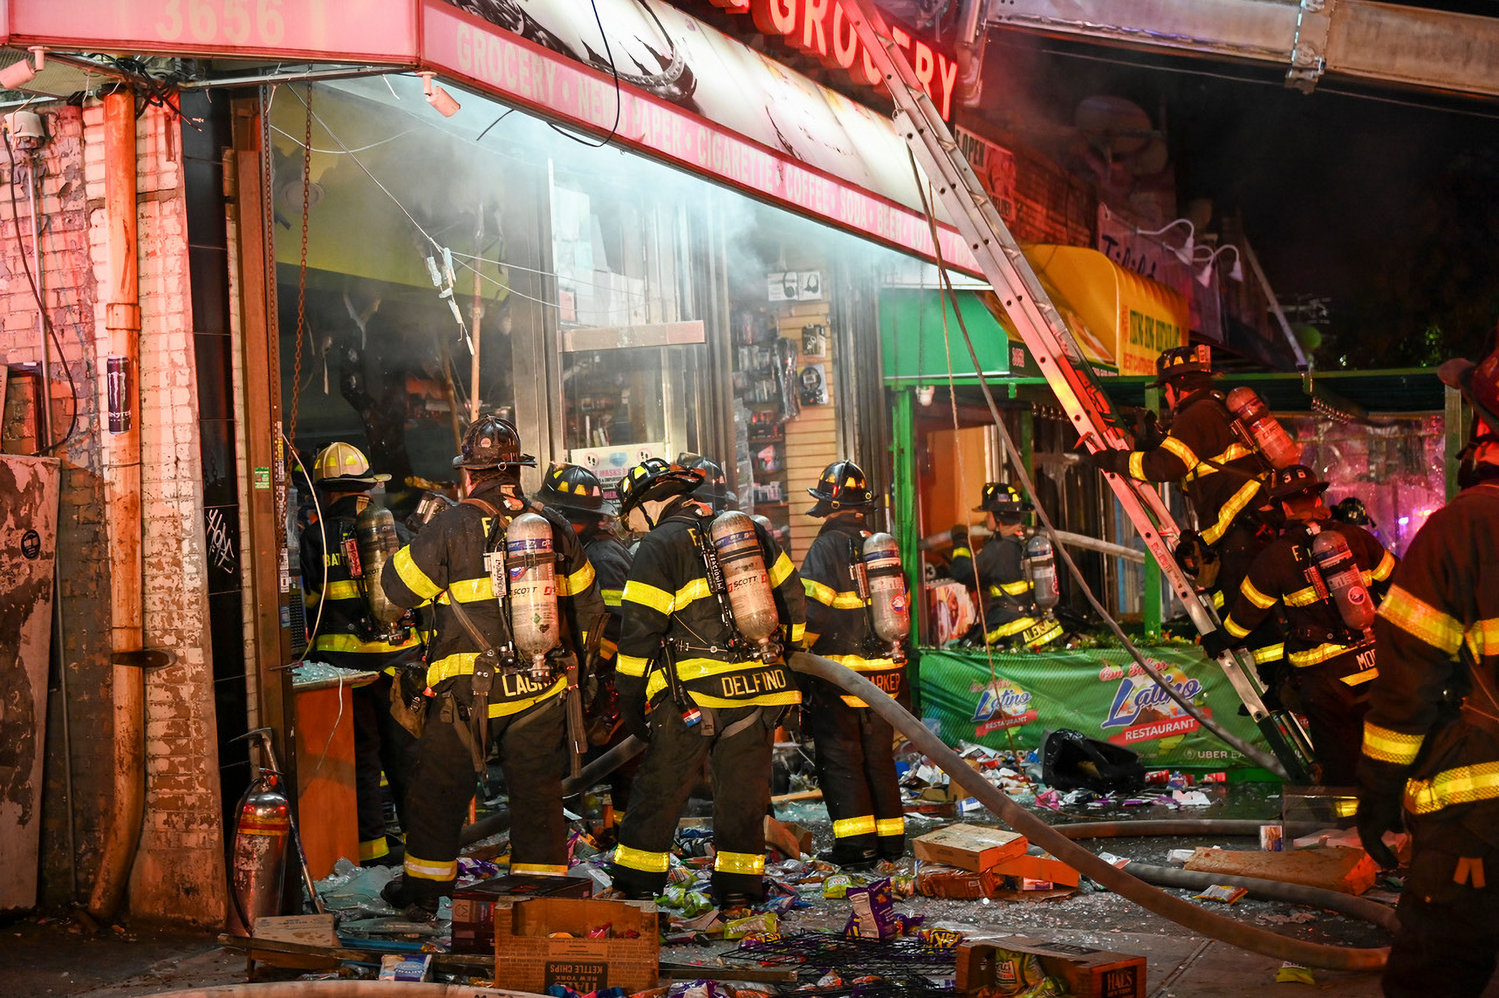 Firefighters work to try and salvage as much of the Bailey Deli & Grocery store as they can as fire raced through the popular bodega on the corner of Bailey Avenue and West 238th Street. Investigators believe the four-alarm fire started in the nearby Yeung Hing Restaurant, and ultimately damaged four other businesses.